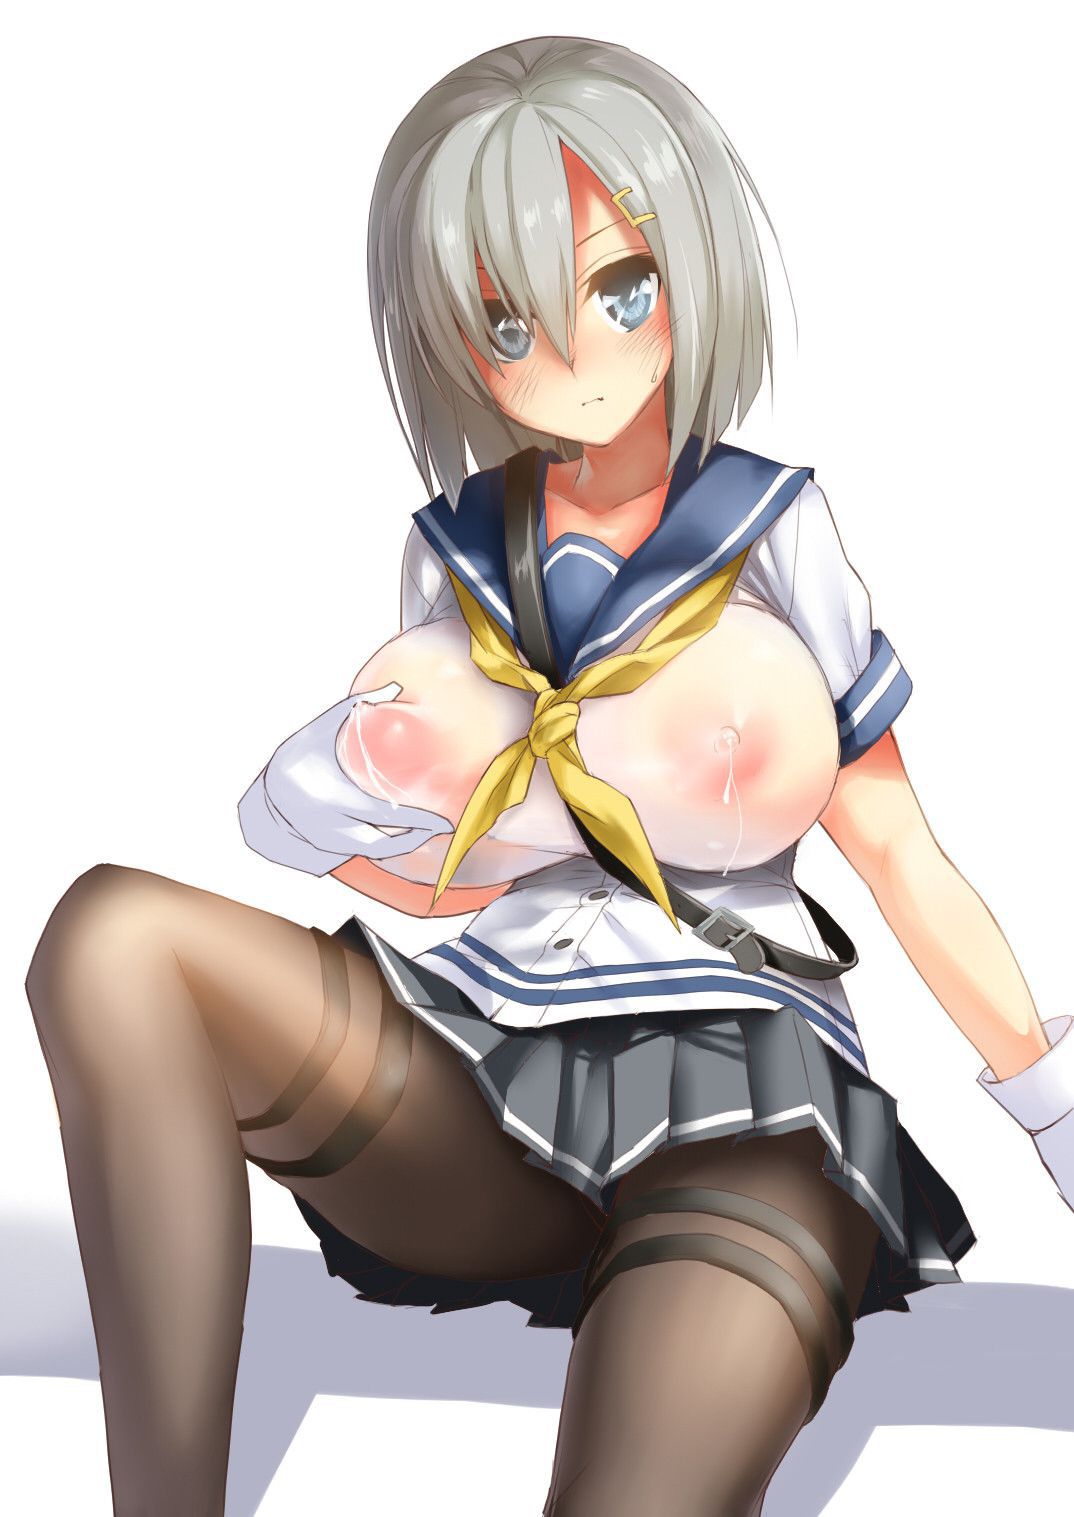 [Image] "ship this ' of warship daughter sexy cuteness is abnormal wwwwwwwwwwww 78